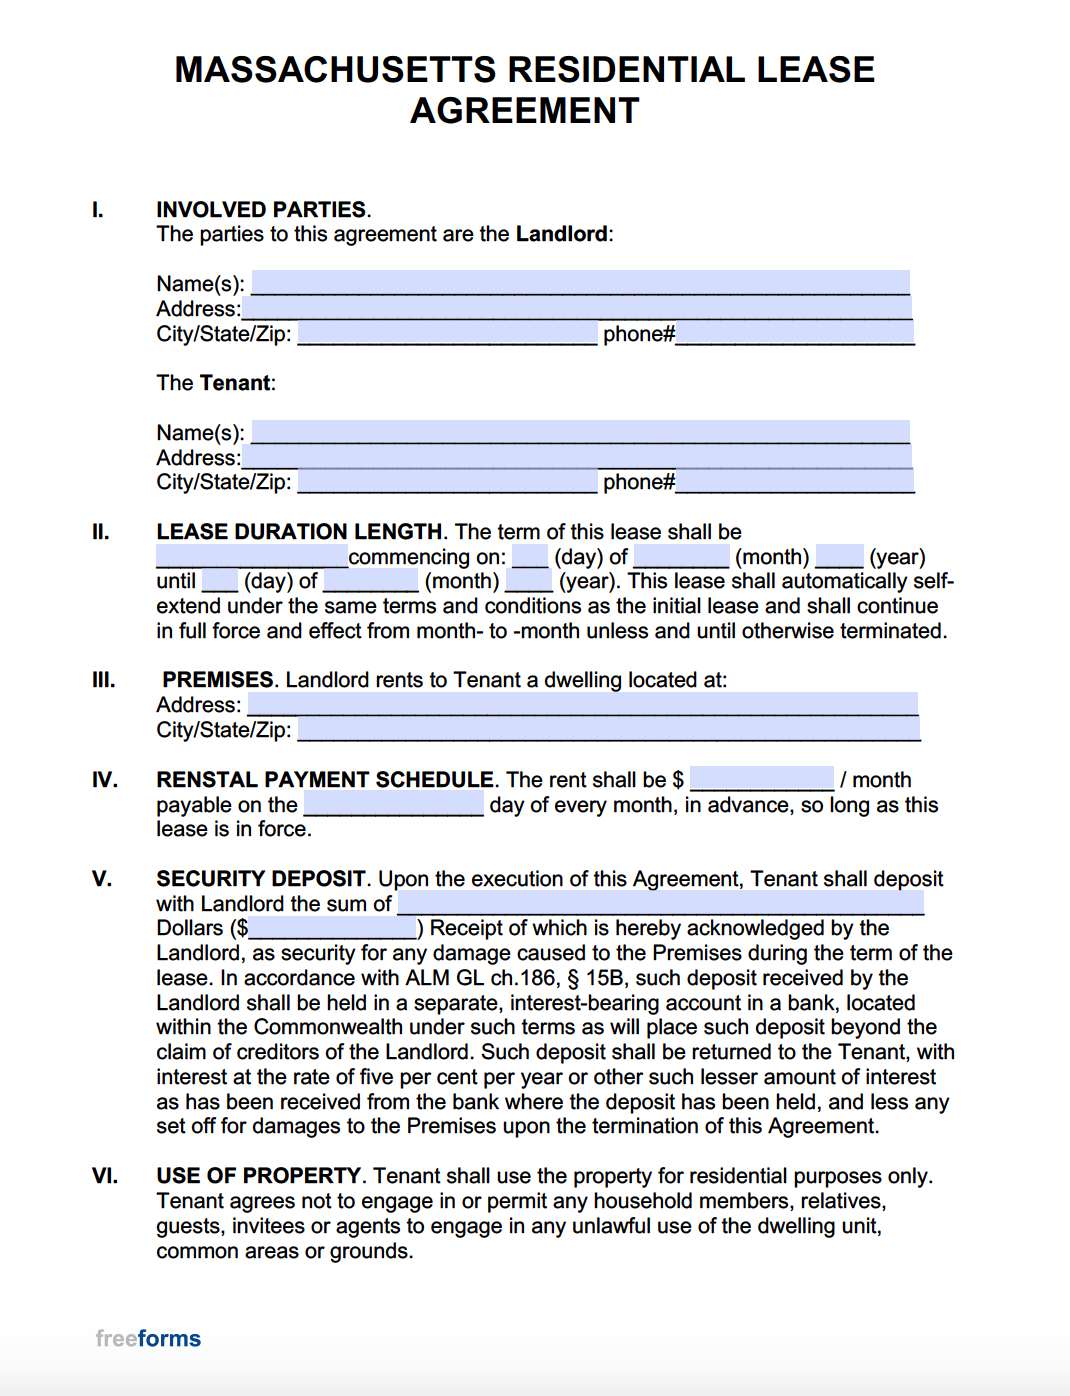 ma-residential-lease-agreement-form-printable-form-templates-and-letter